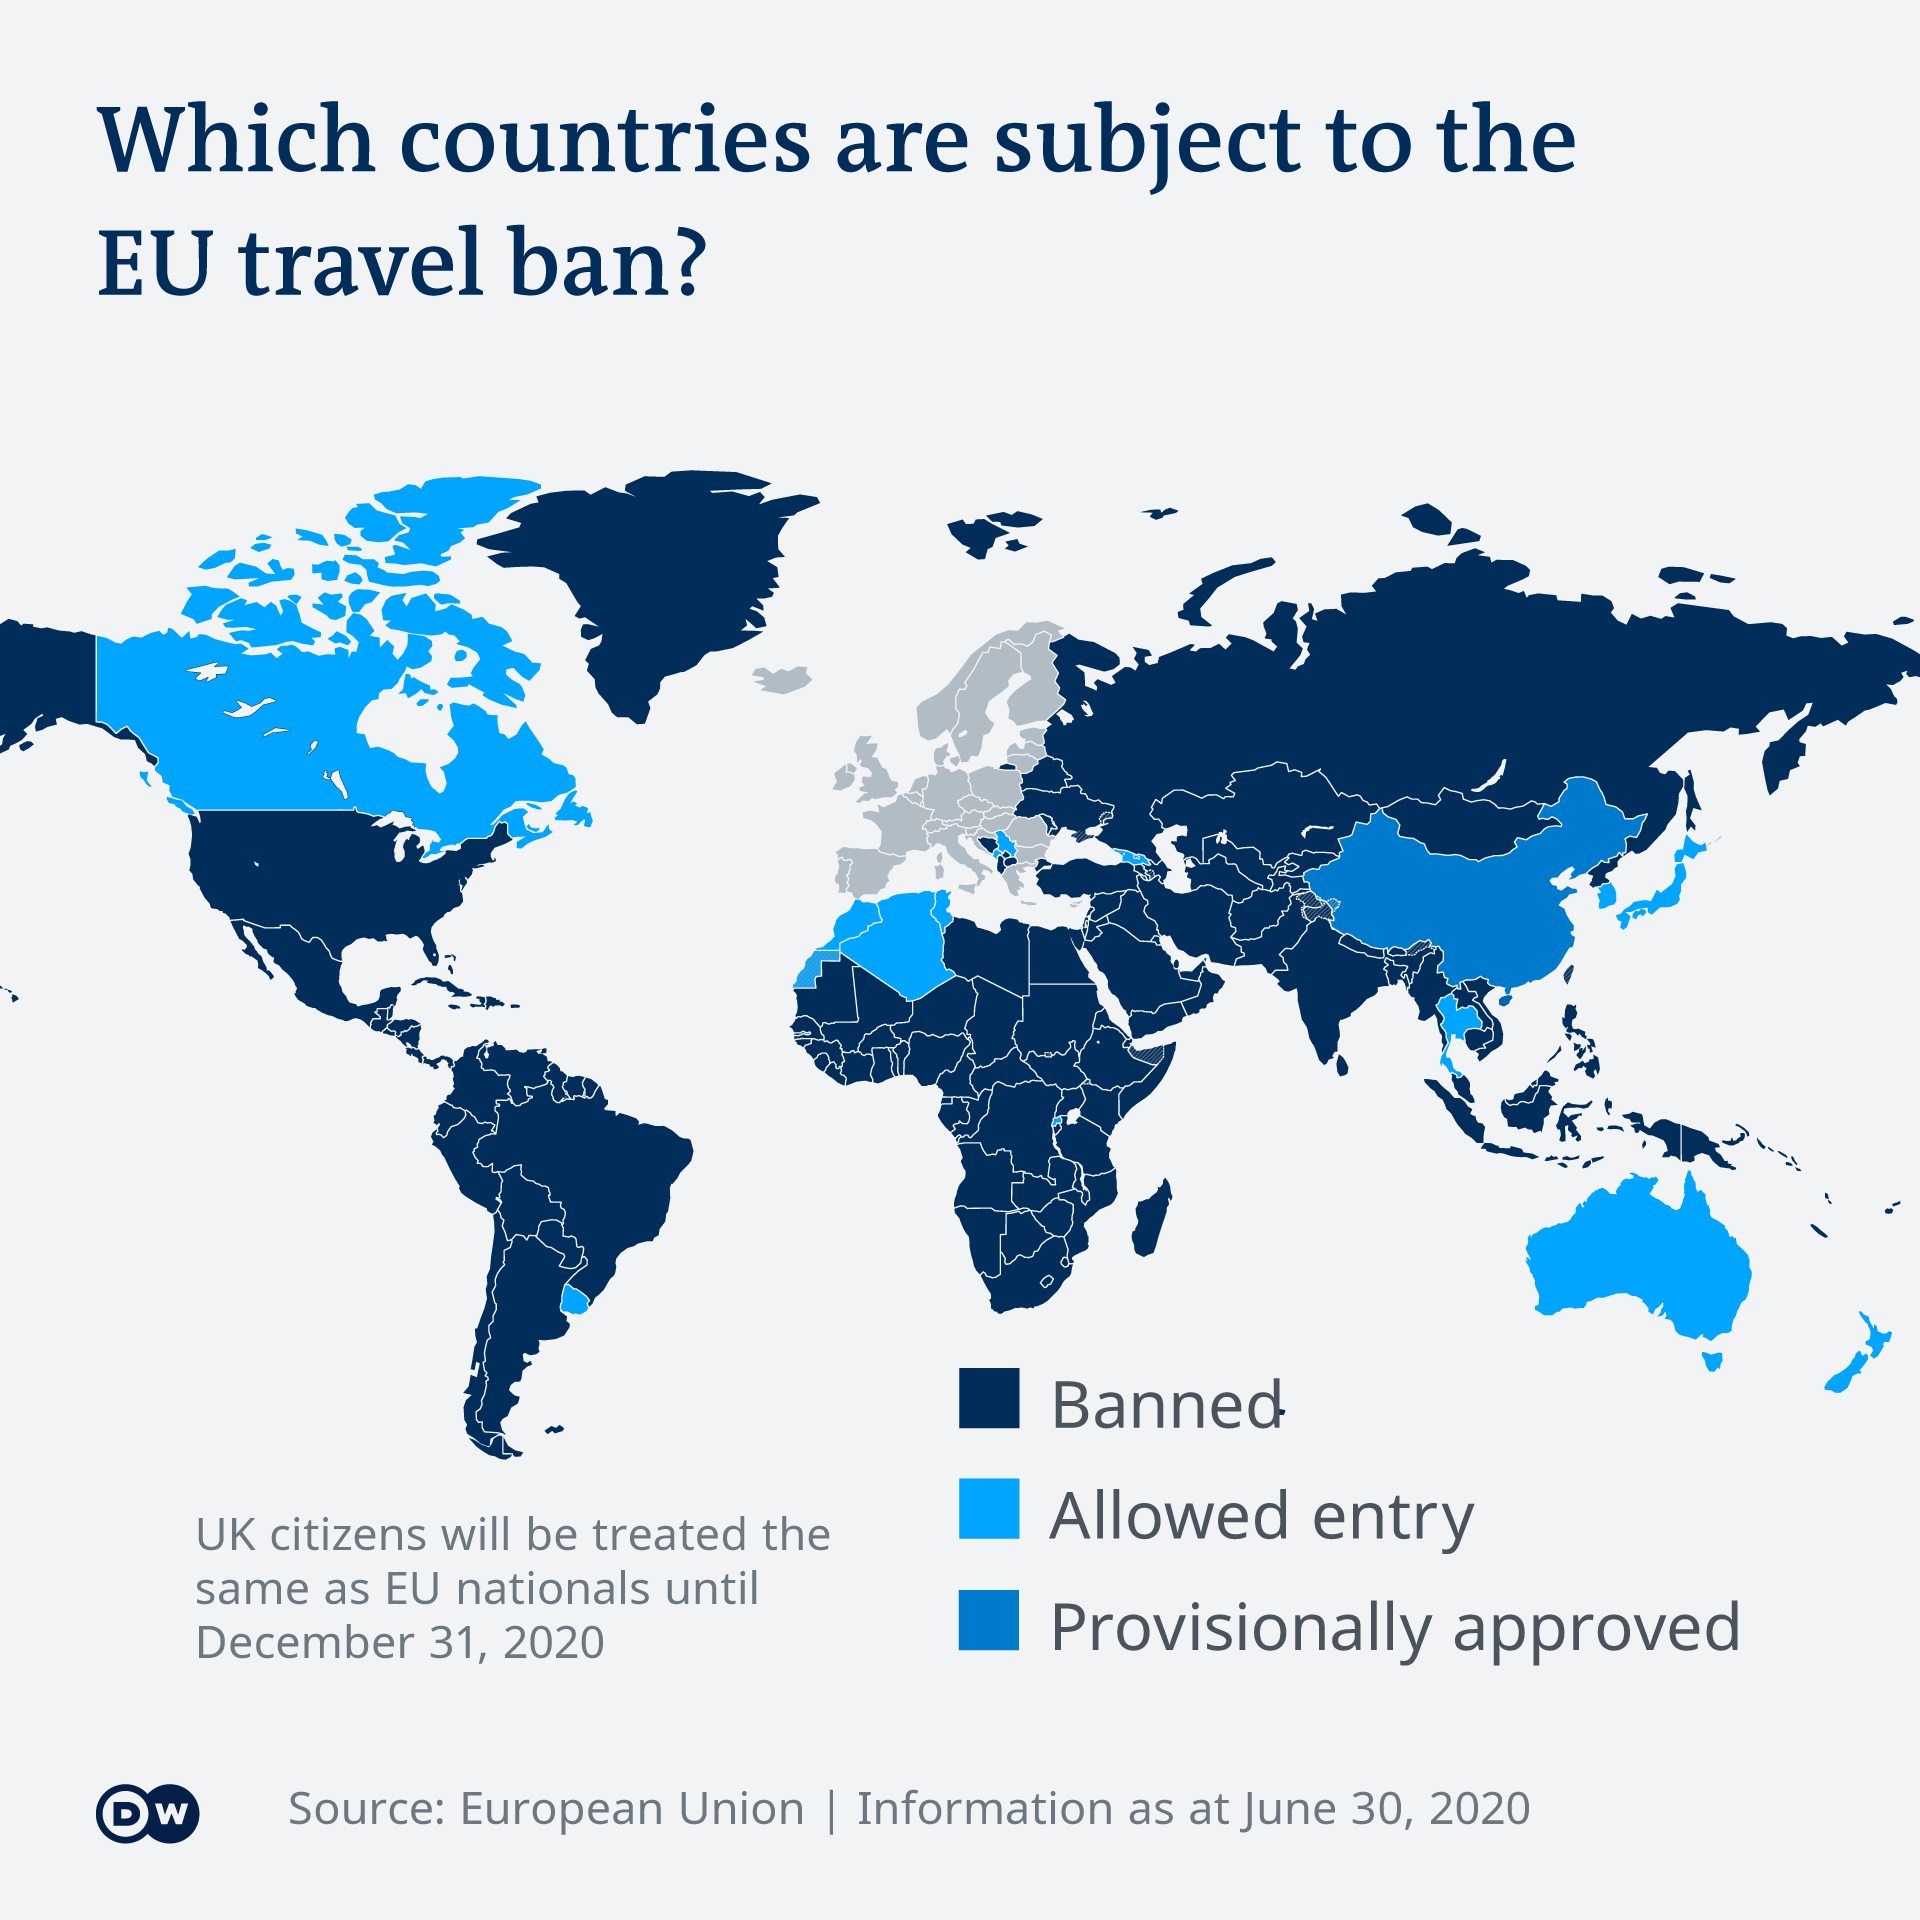 Infographic showing which countries are subject to an EU travel ban